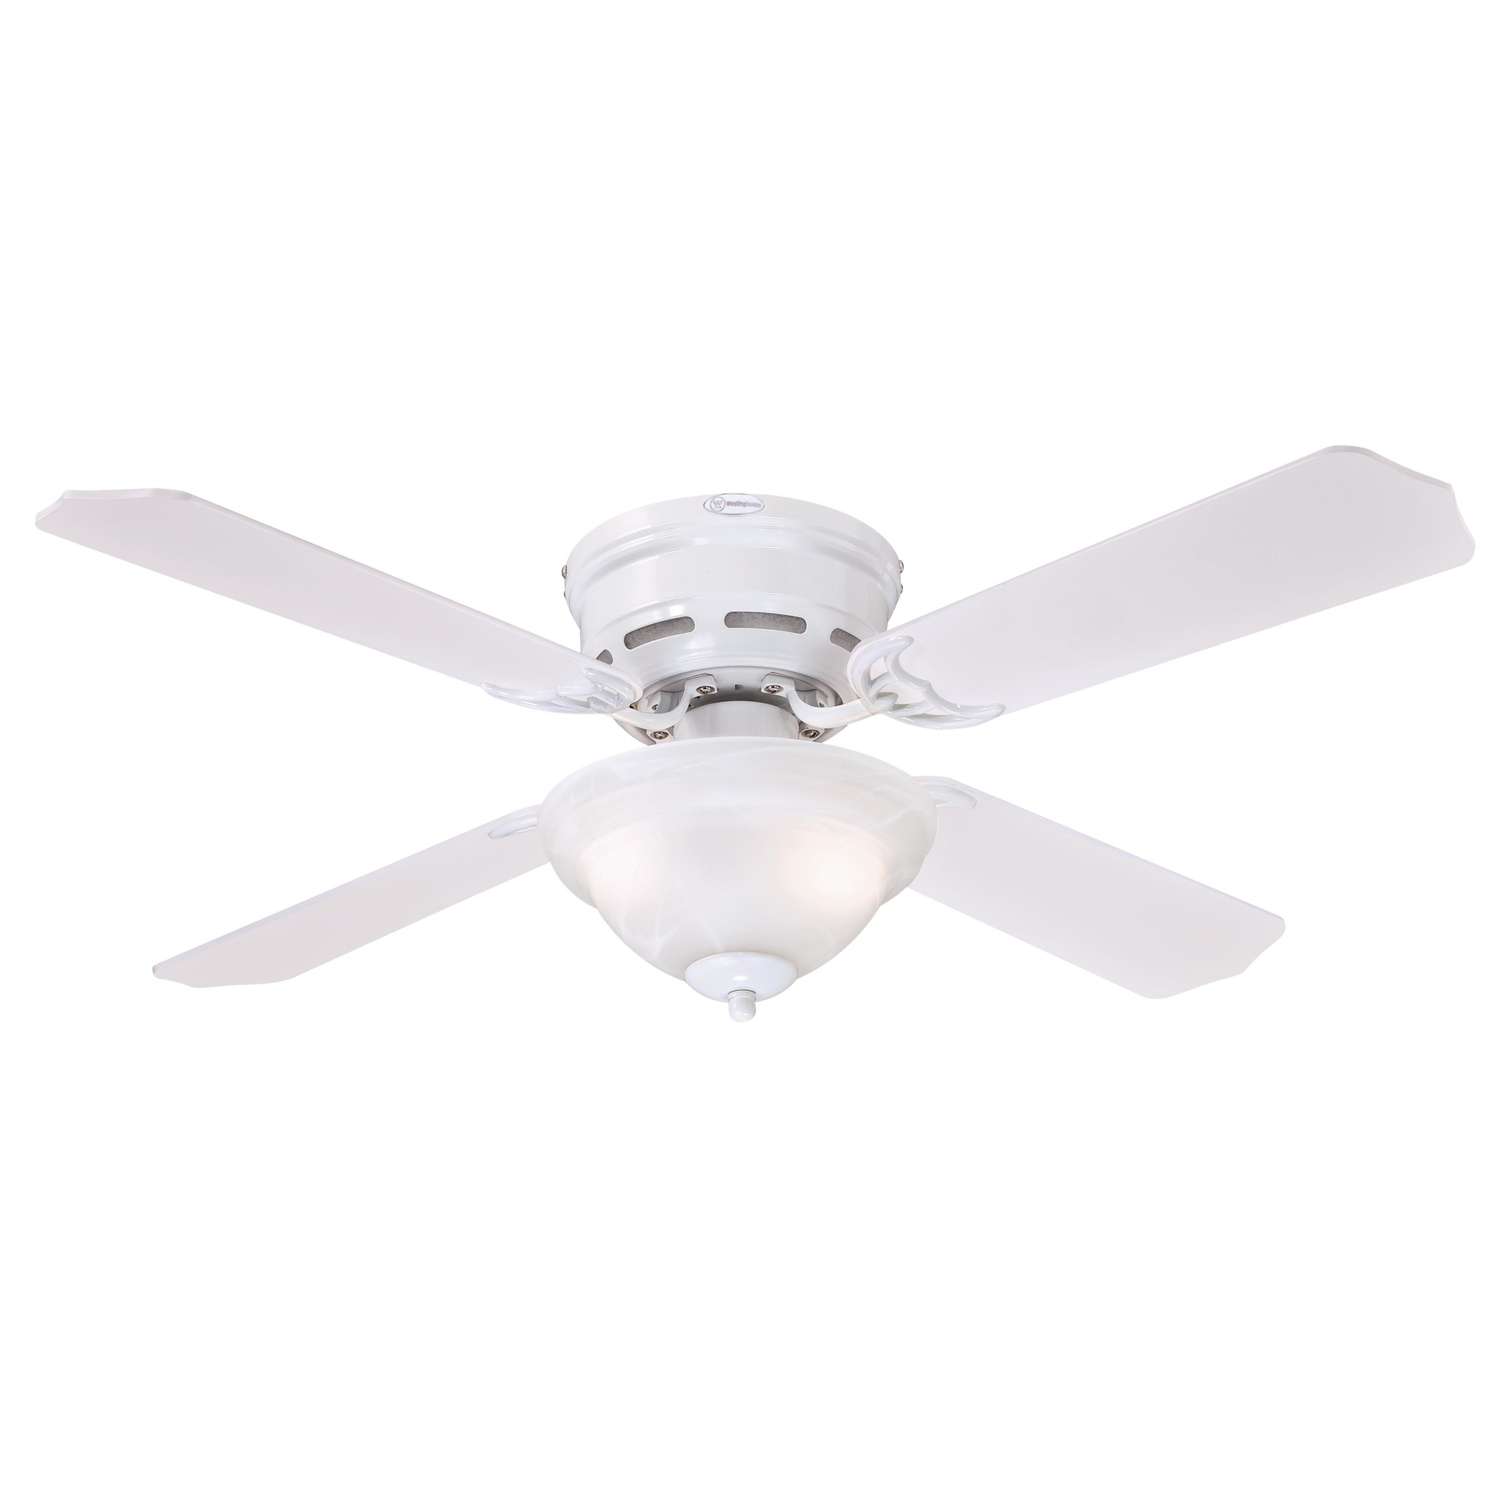 Westinghouse Hadley 42 in. White Indoor Ceiling Fan Ace